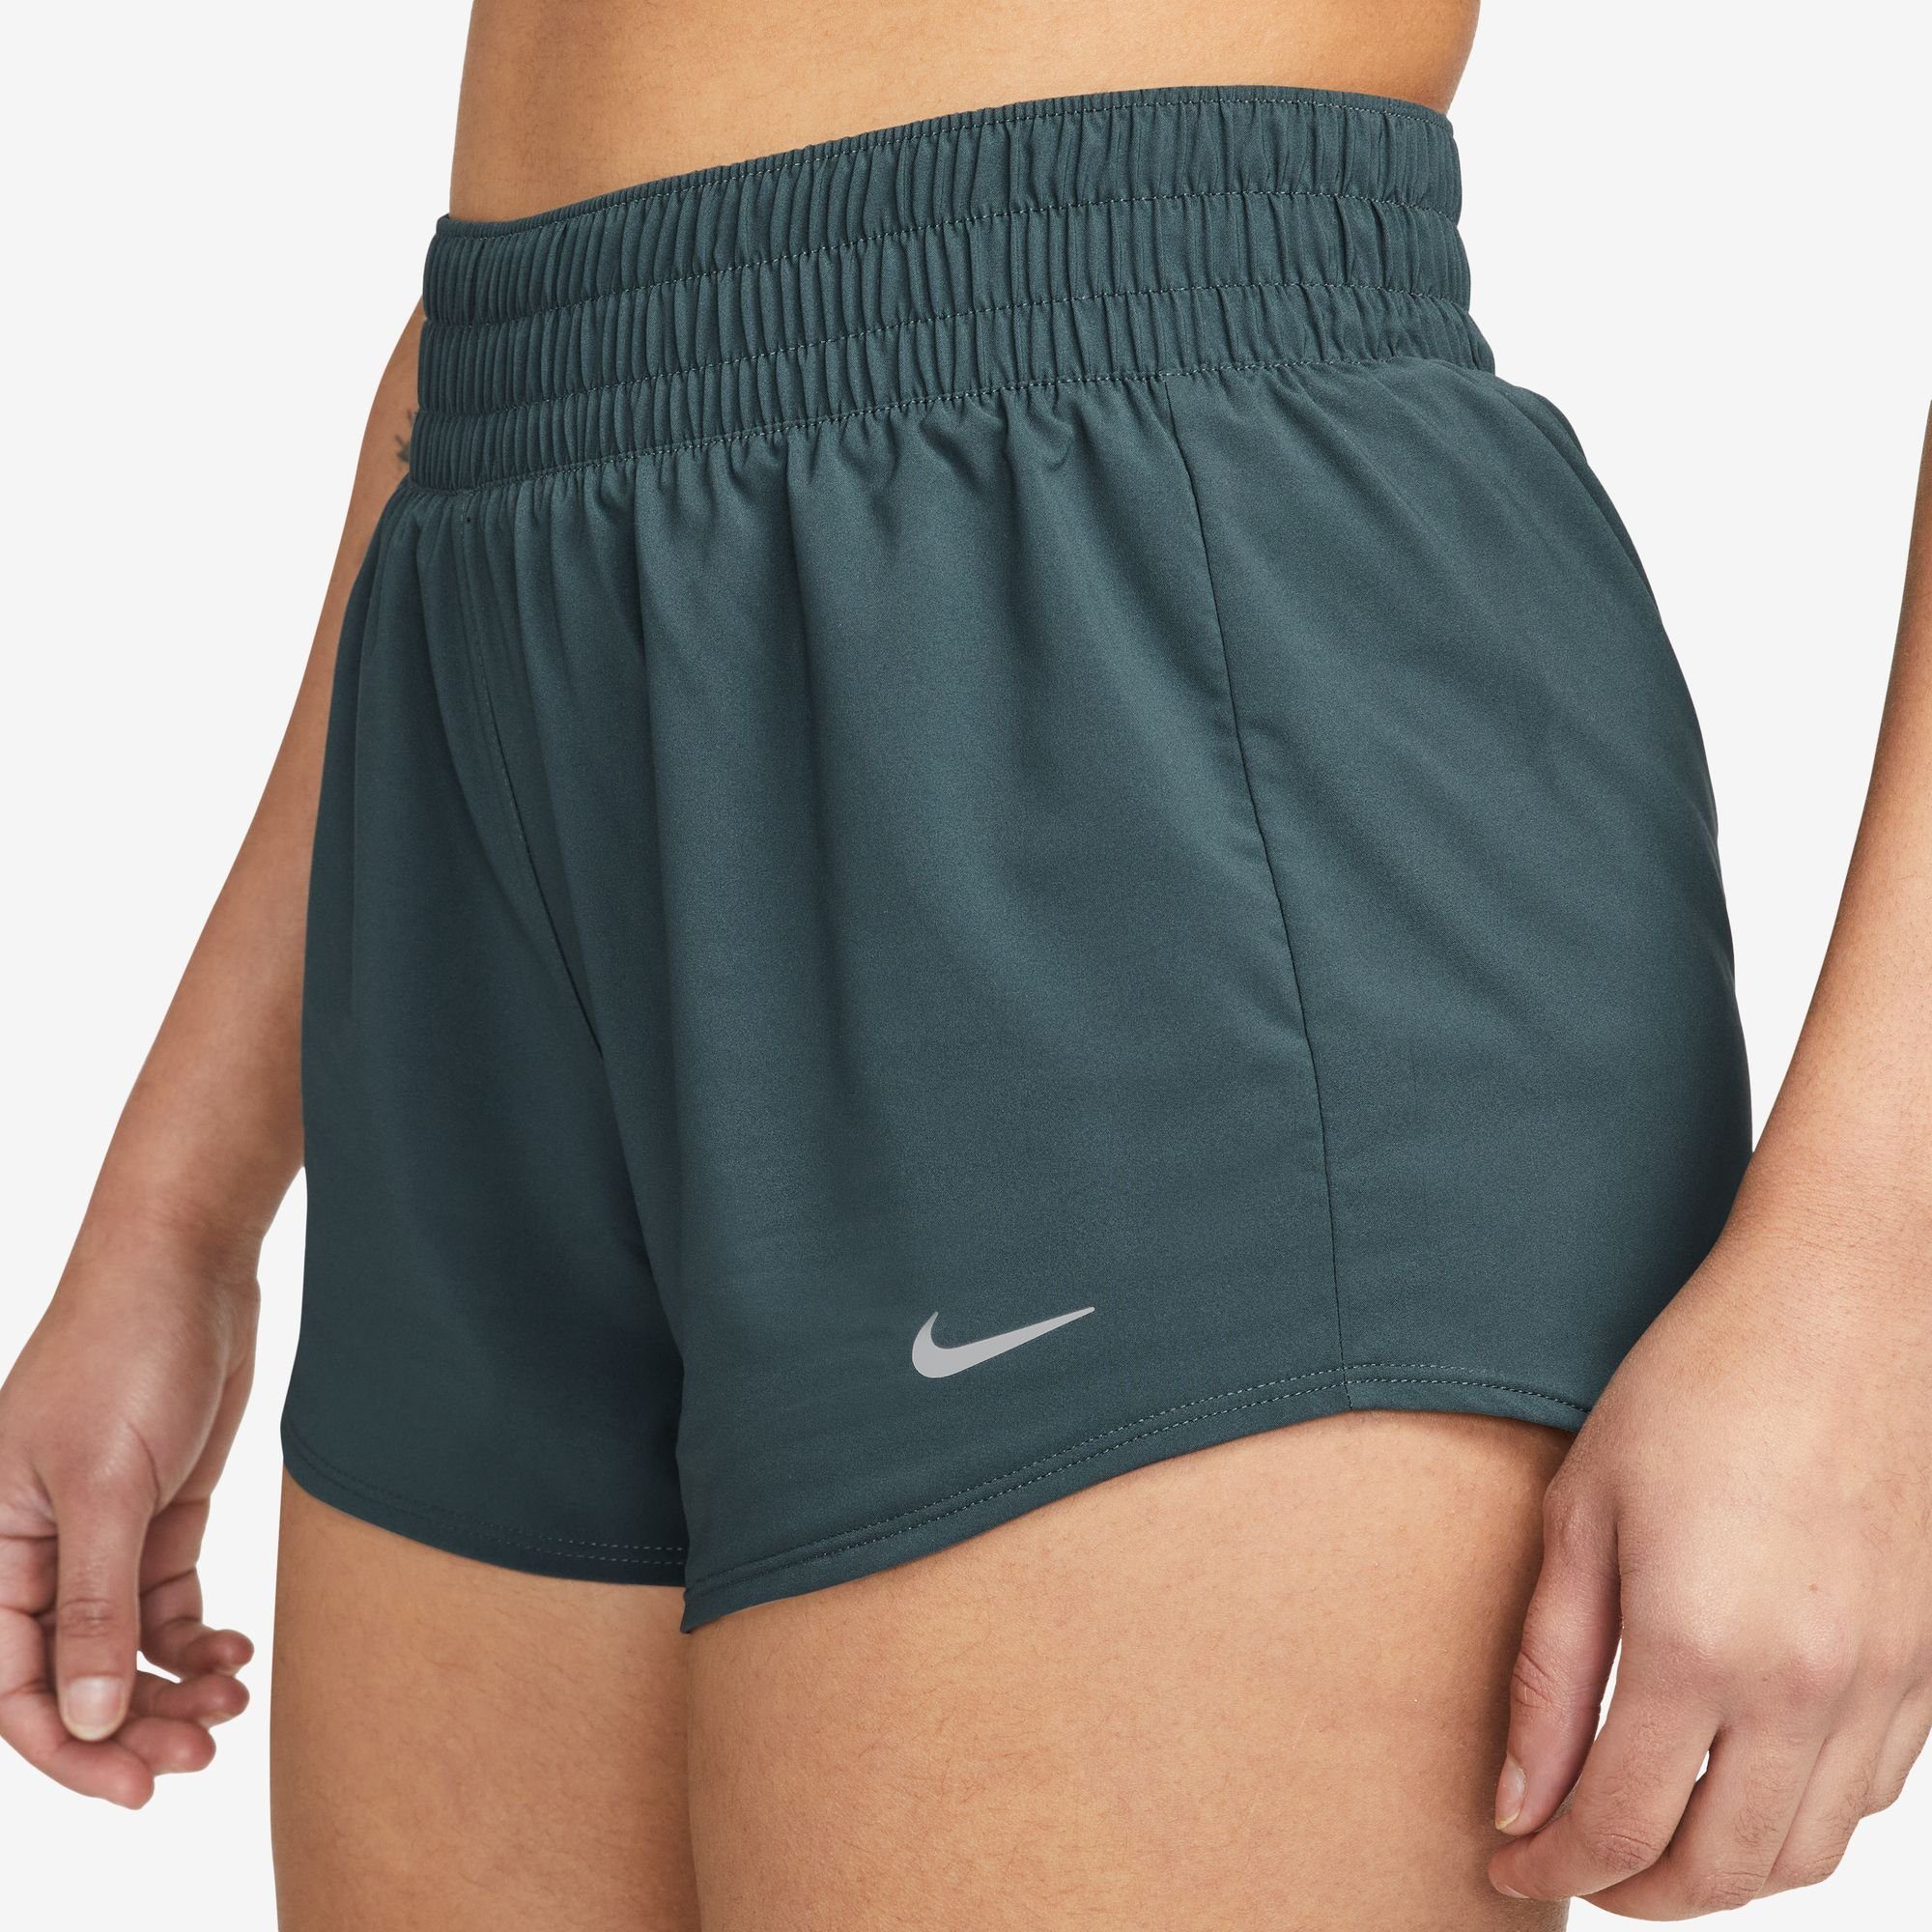 MID-RISE JUNGLE/REFLECTIVE DRI-FIT ONE Nike DEEP SILV BRIEF-LINED SHORTS Trainingsshorts WOMEN'S